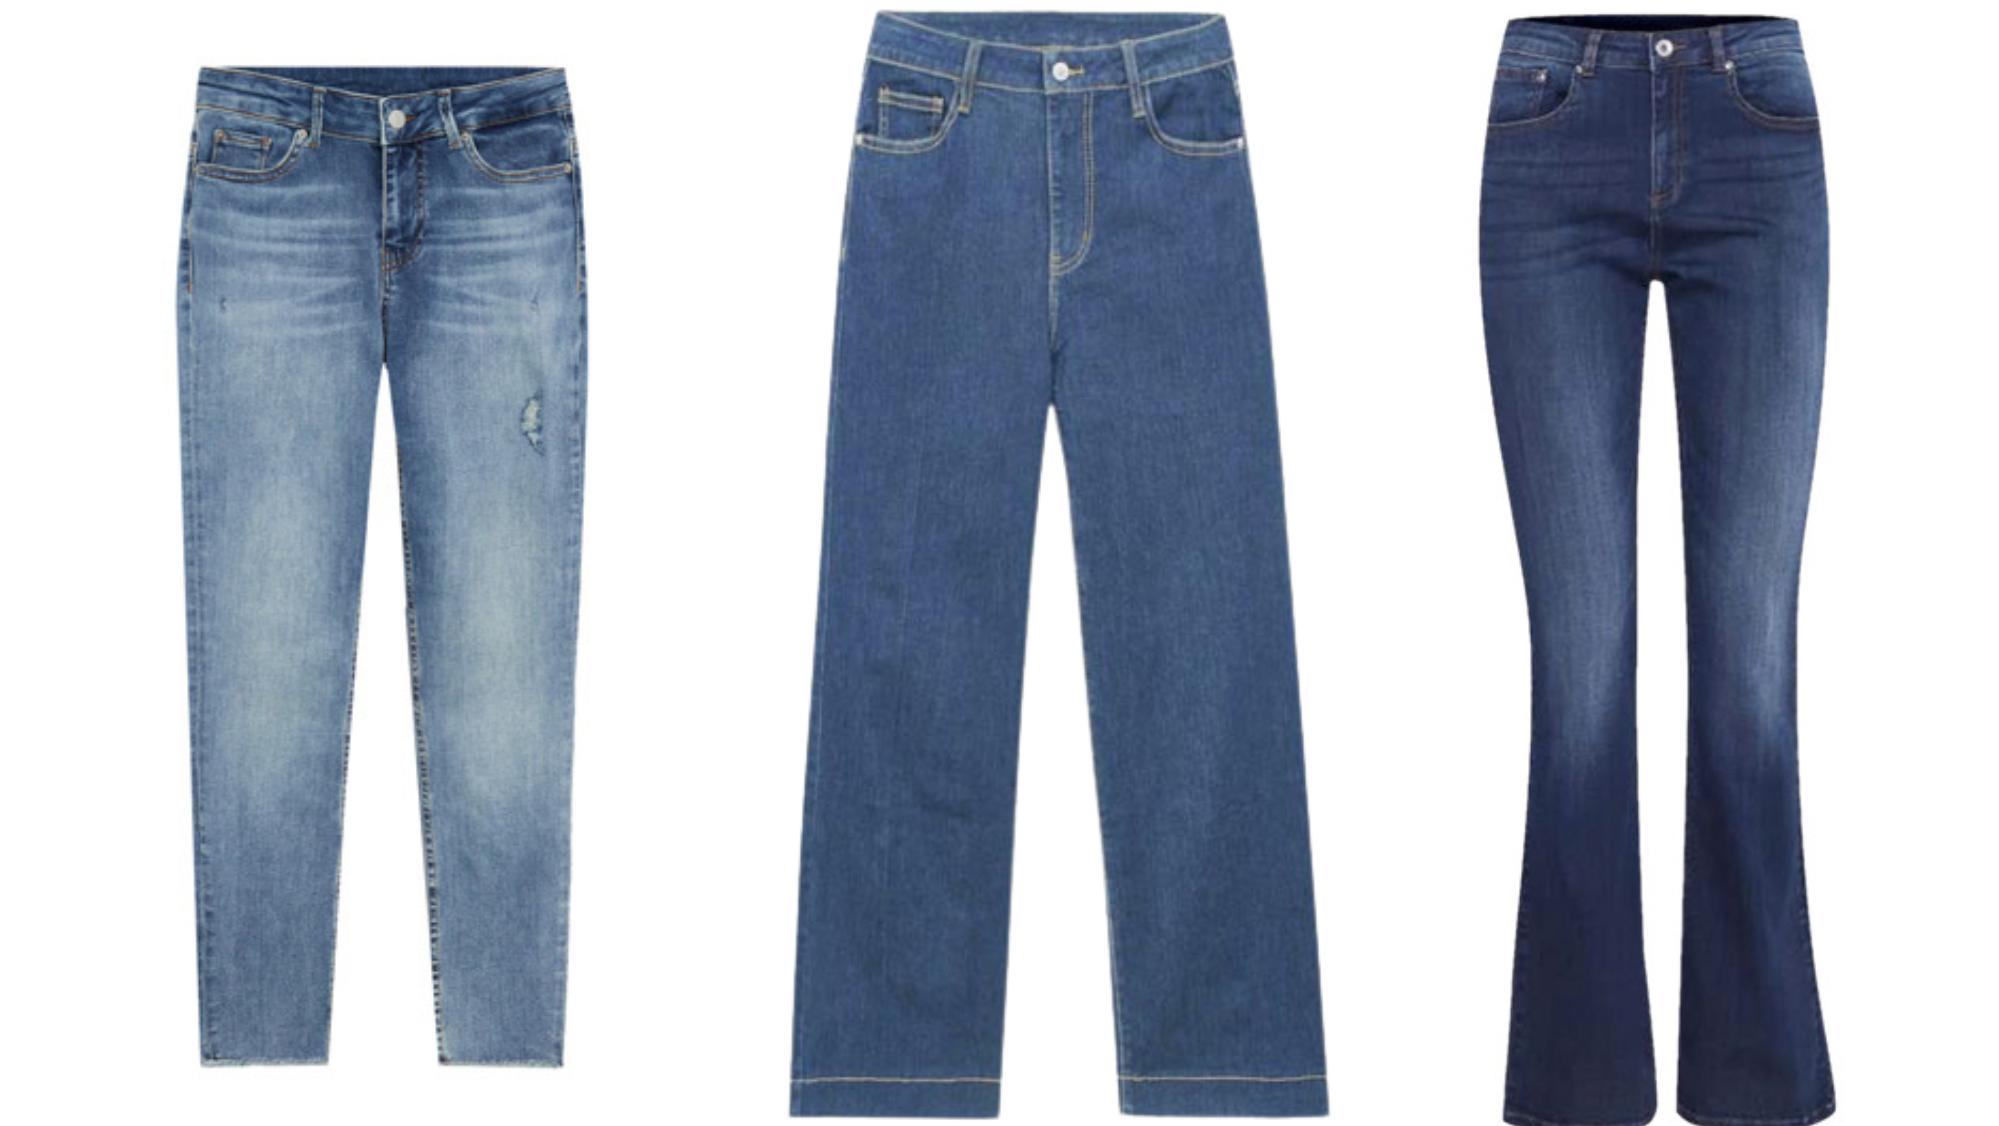 different types of jeans, jeans, denim jeans